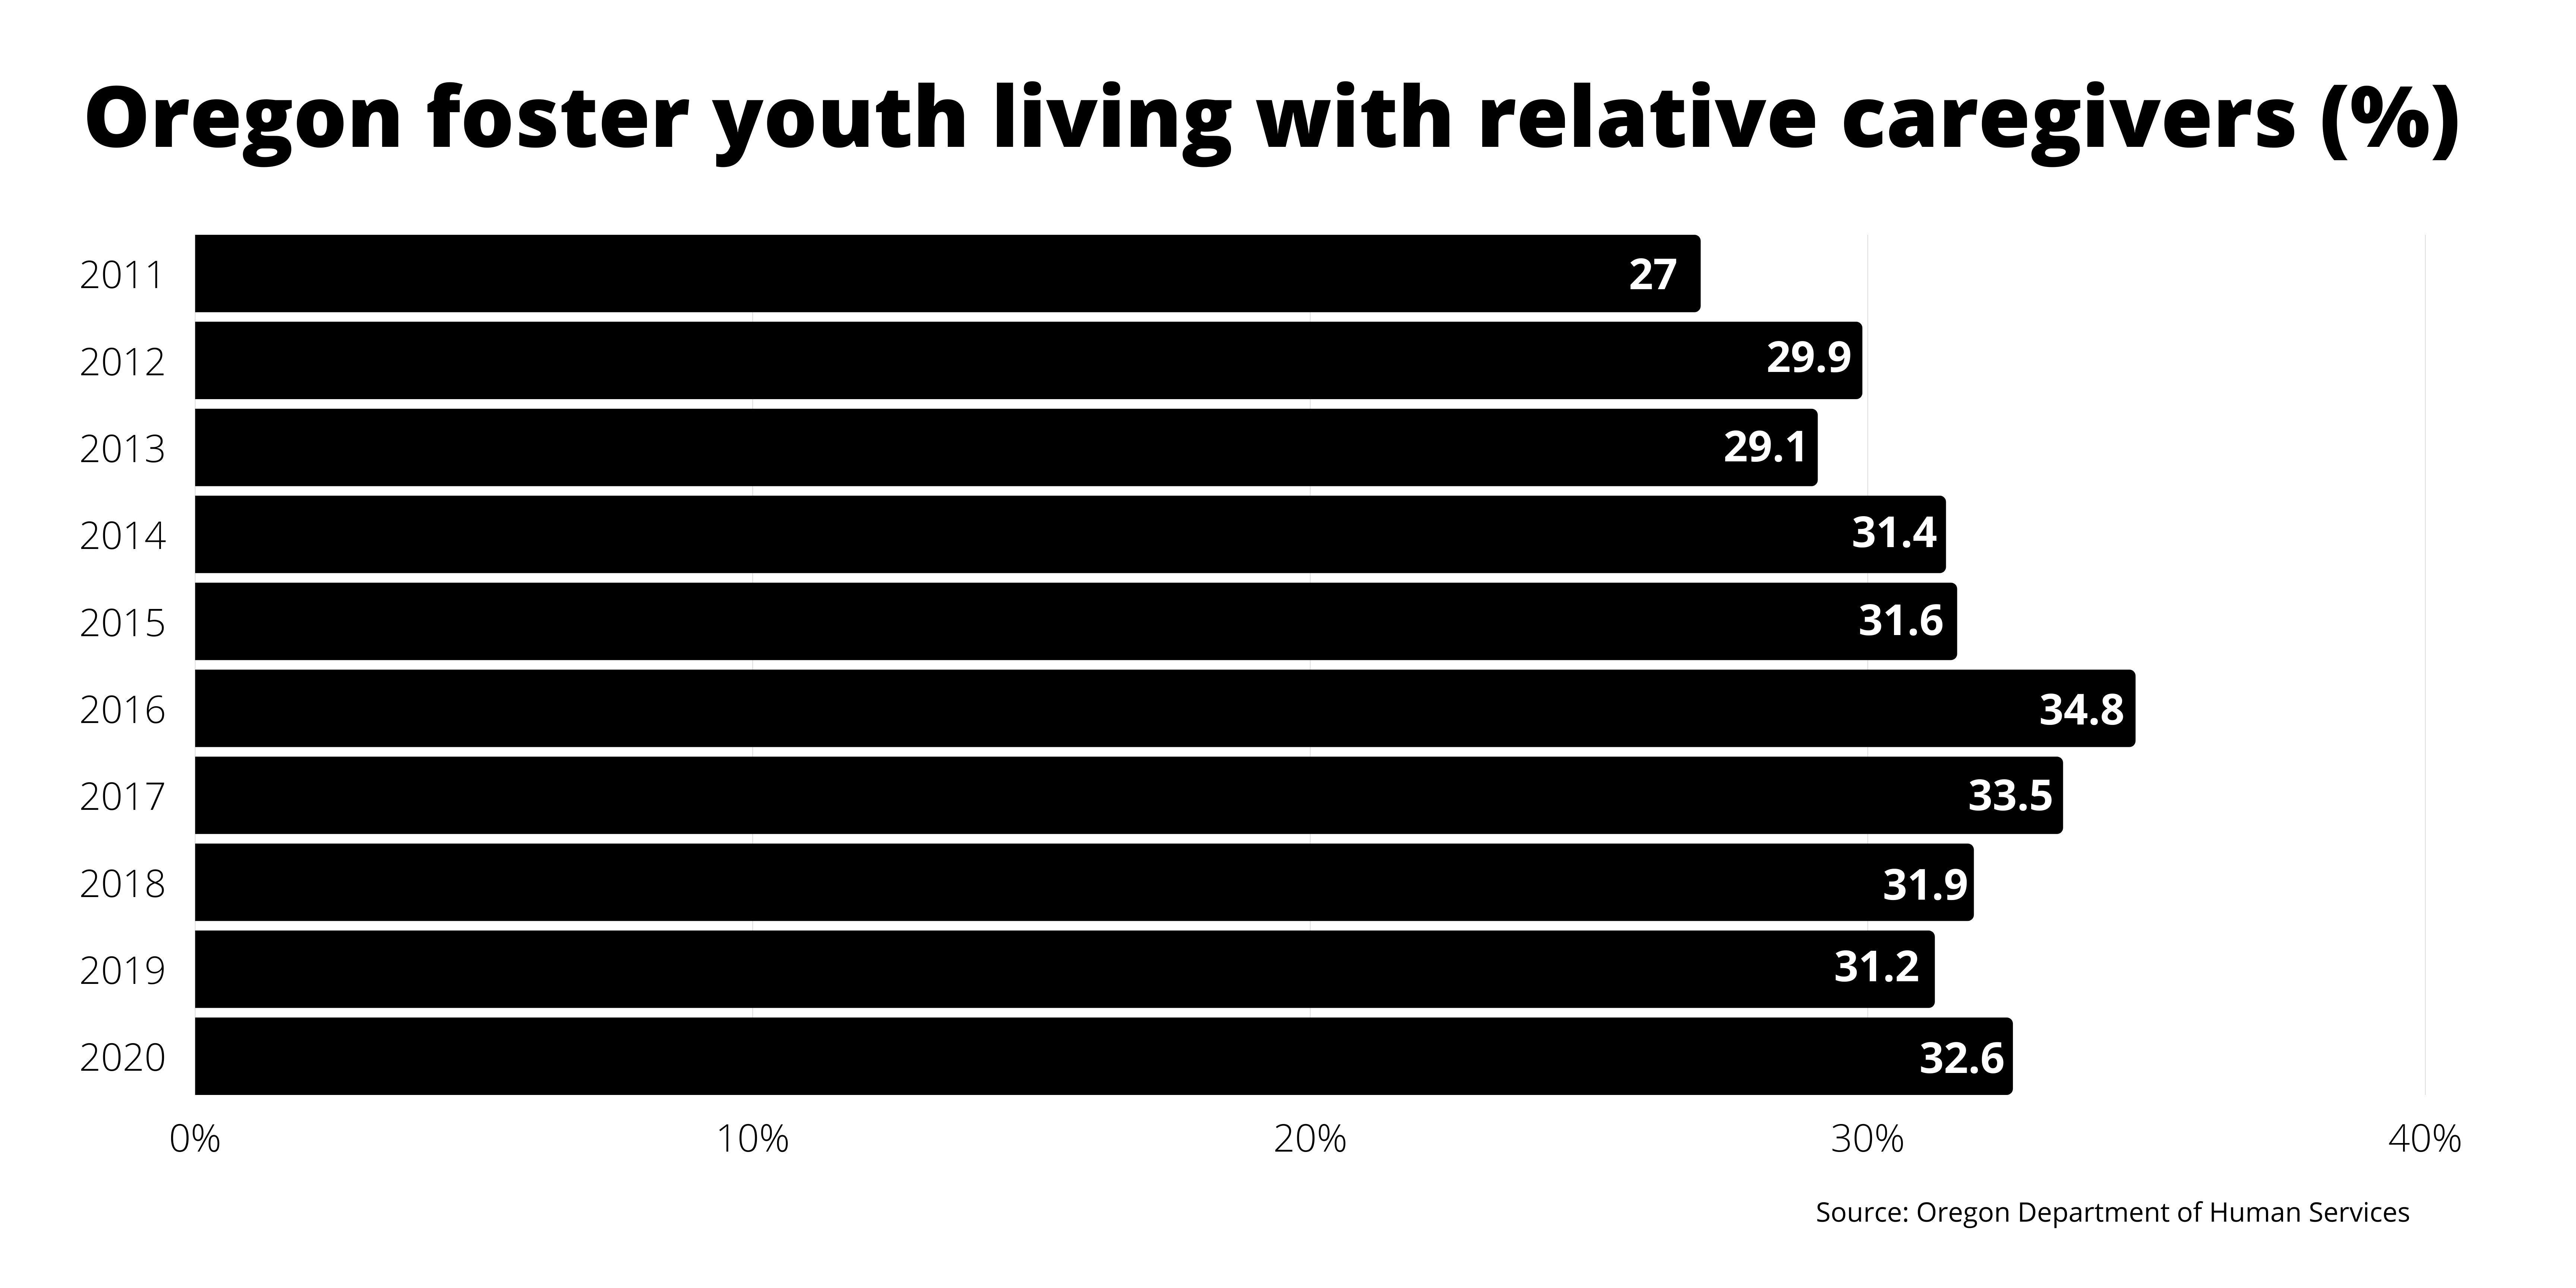 A bar graph showing the percentage of Oregon foster youth living with relative caregivers each year from 2011 to 2020.